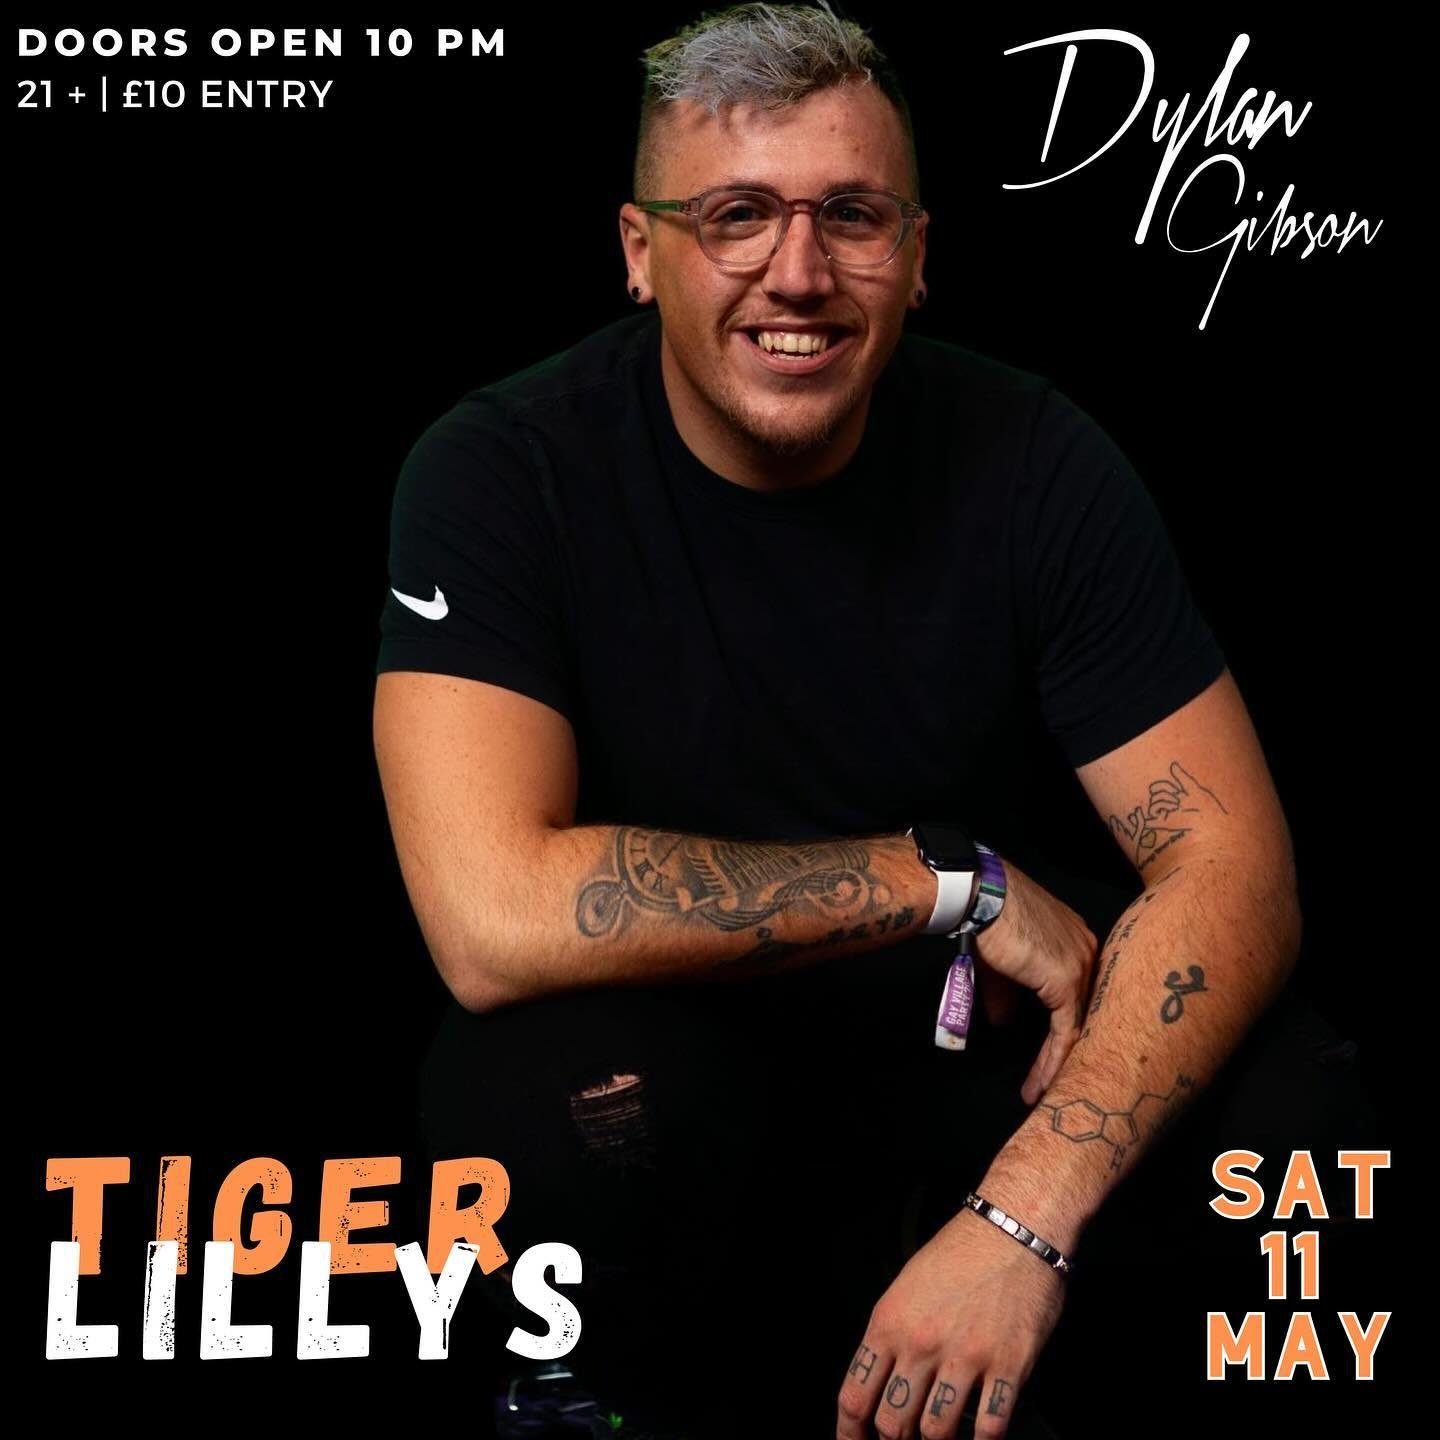 Getting us all in a #spin this SATURDAY. . . Our 𝐃𝐘𝐋𝐀𝐍 is back with some banging choons 🔊 
Doors Open 10pm 🙌 
#tigerlillys #letsroar #eyeofthetiger